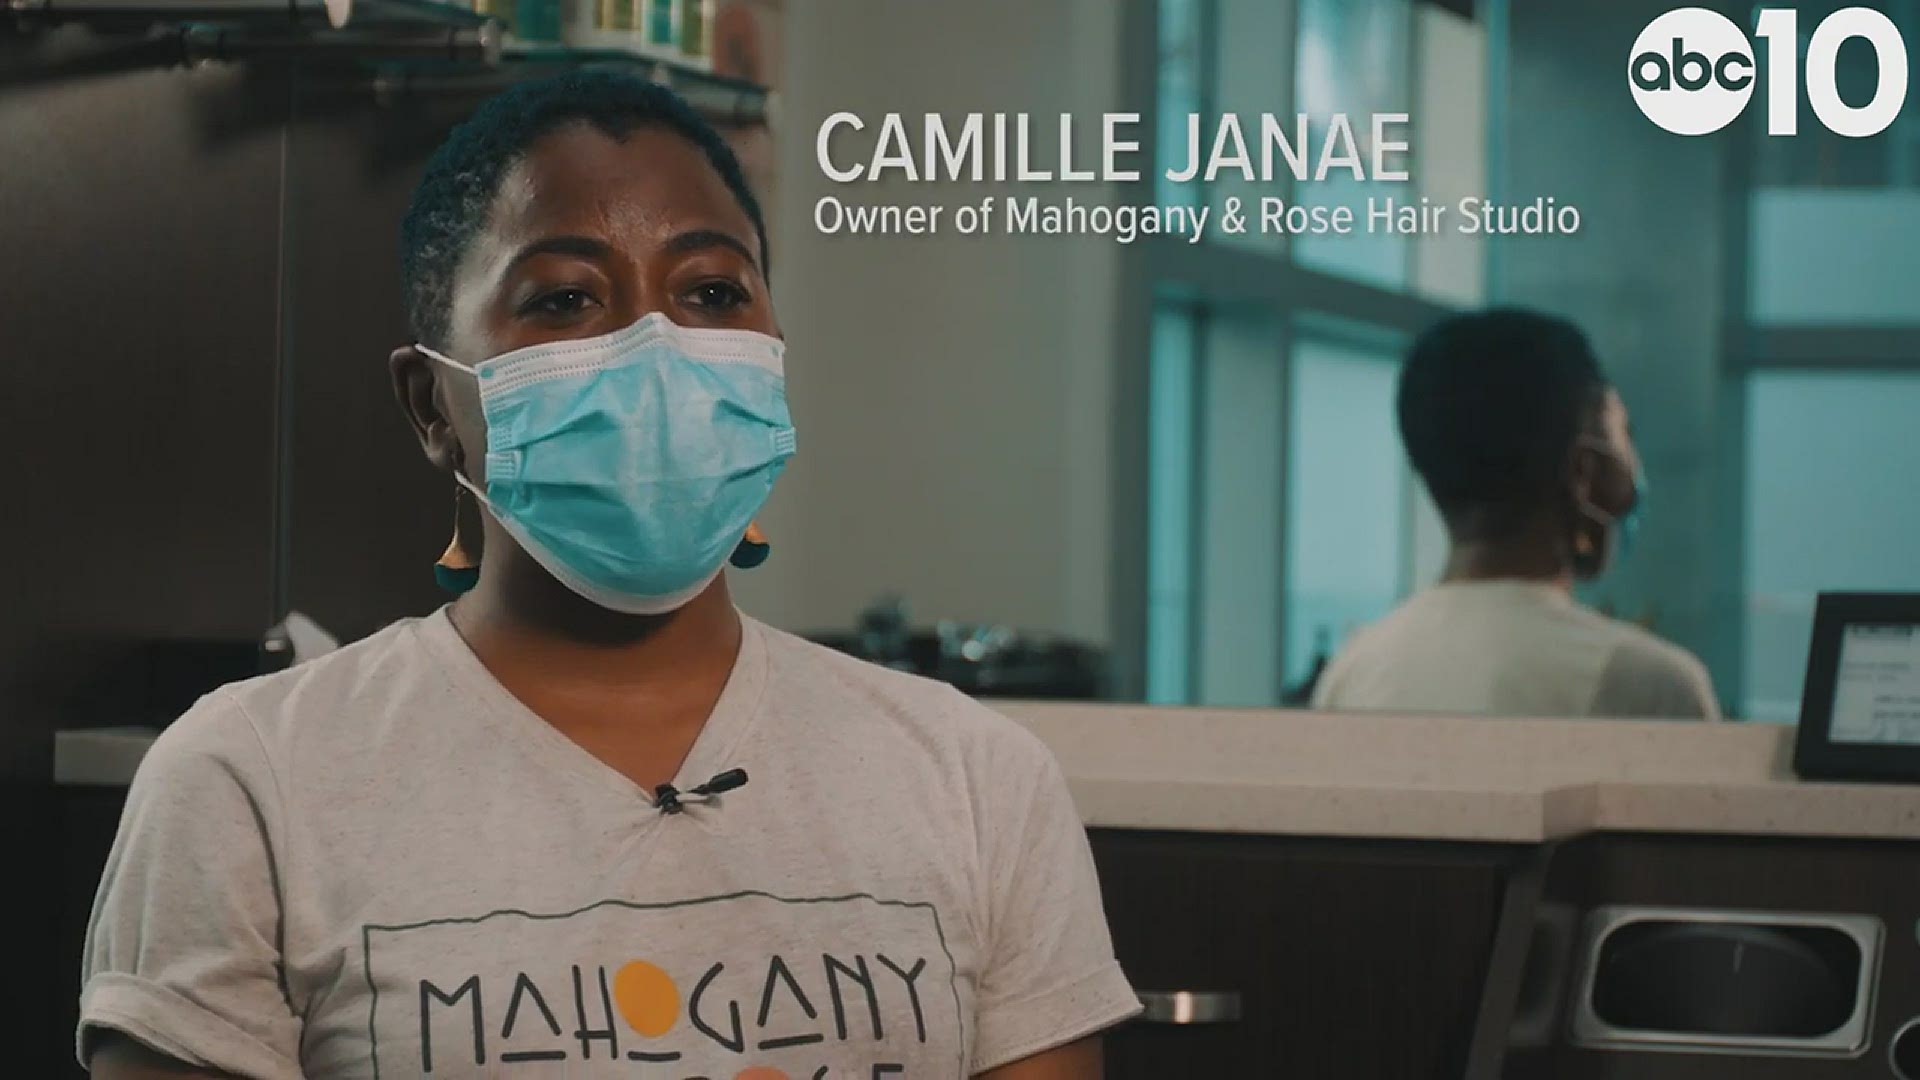 Monica Coleman spoke with Camille Janae, the owner of Mahogany & Rose Hair Studio, a Black-owned salon that caters to those seeking services for their natural hair.